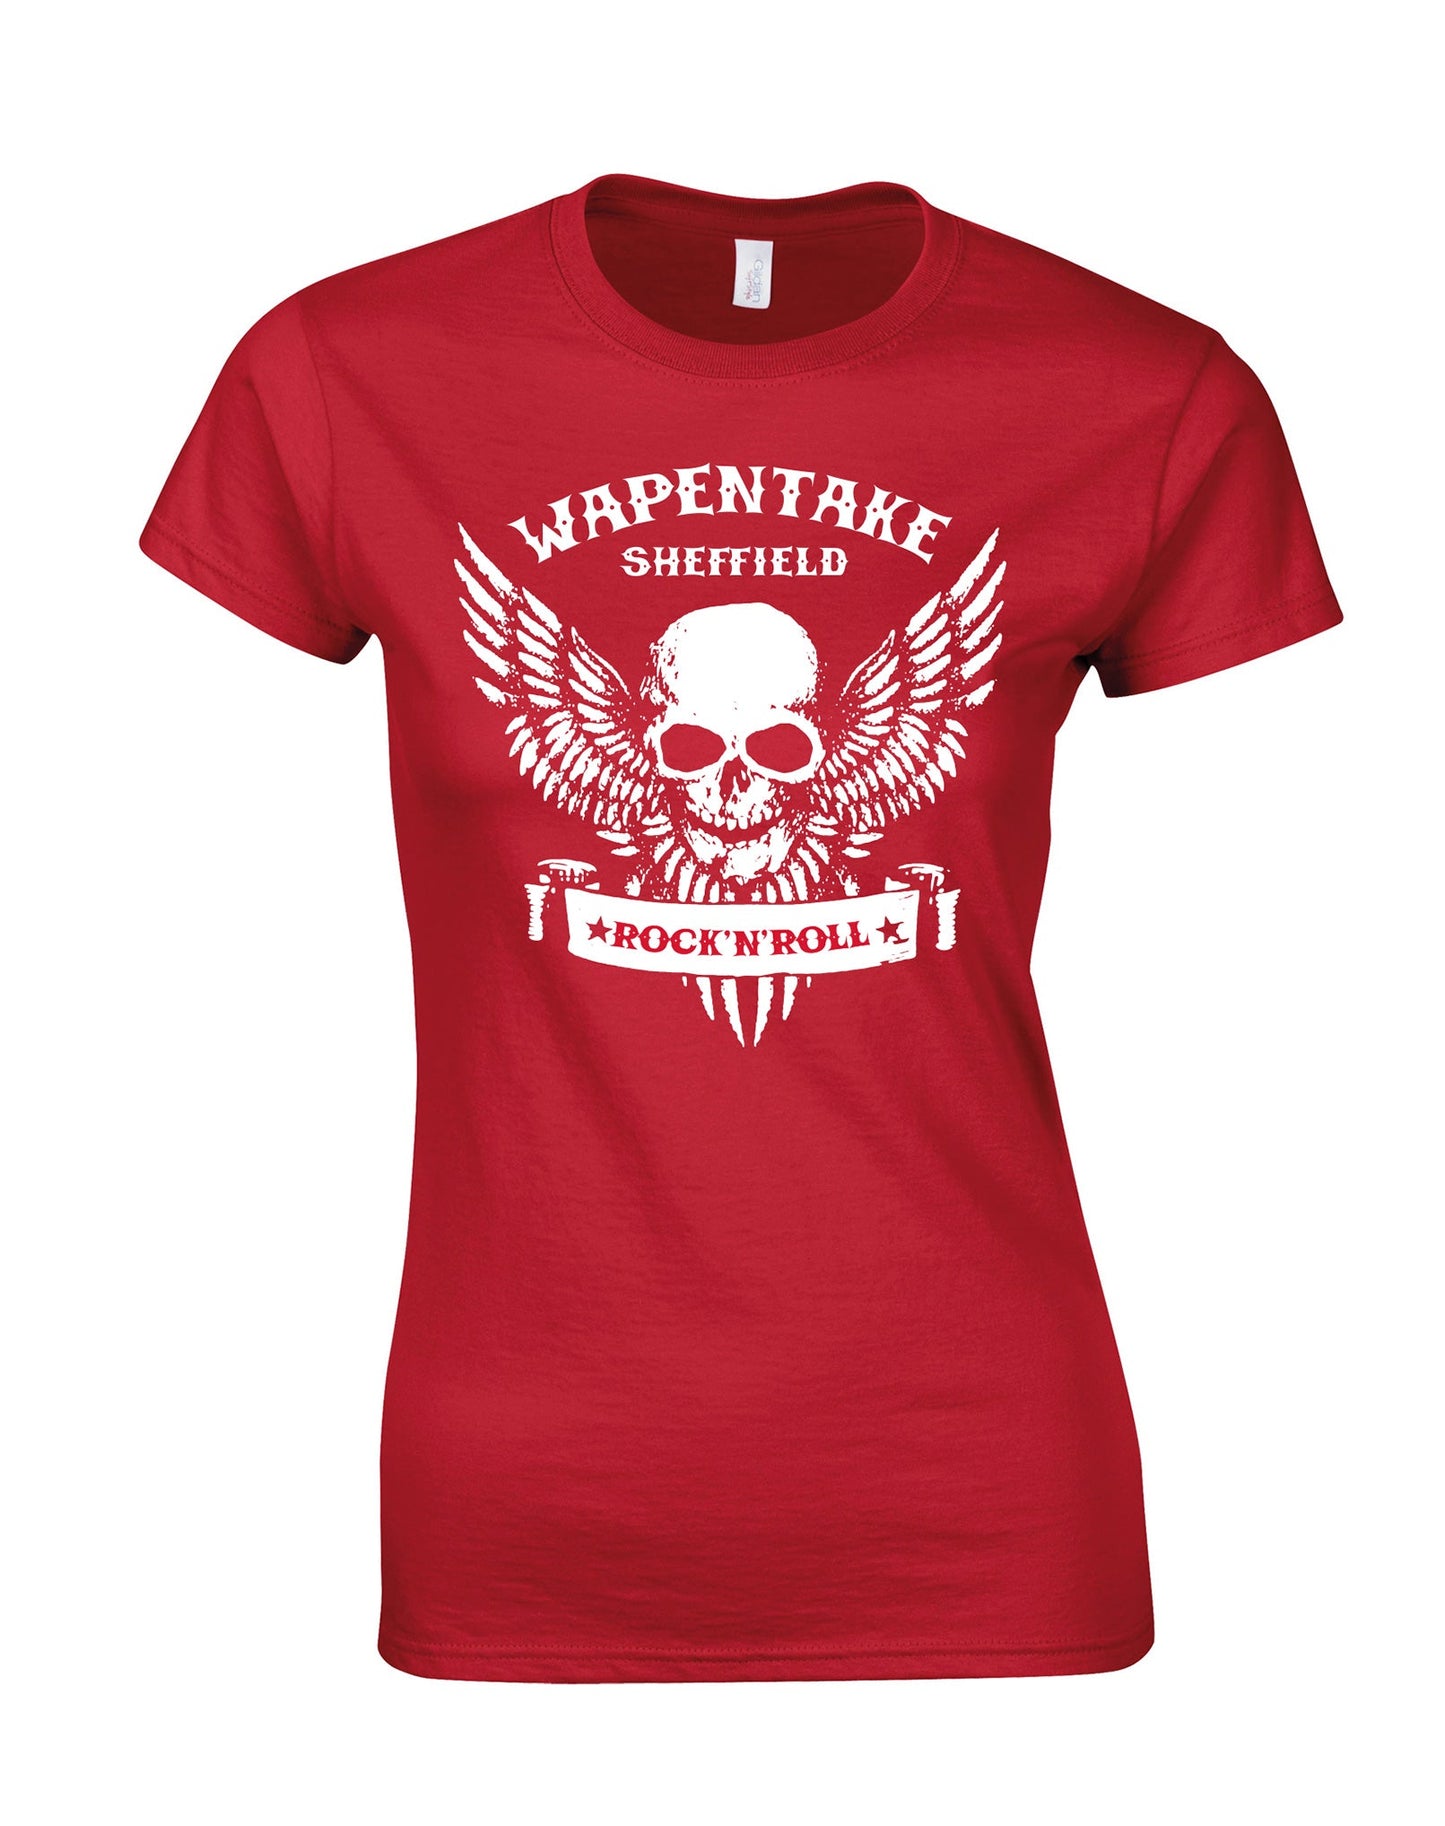 Wapentake skull/wings ladies fit T-shirt - various colours - Dirty Stop Outs